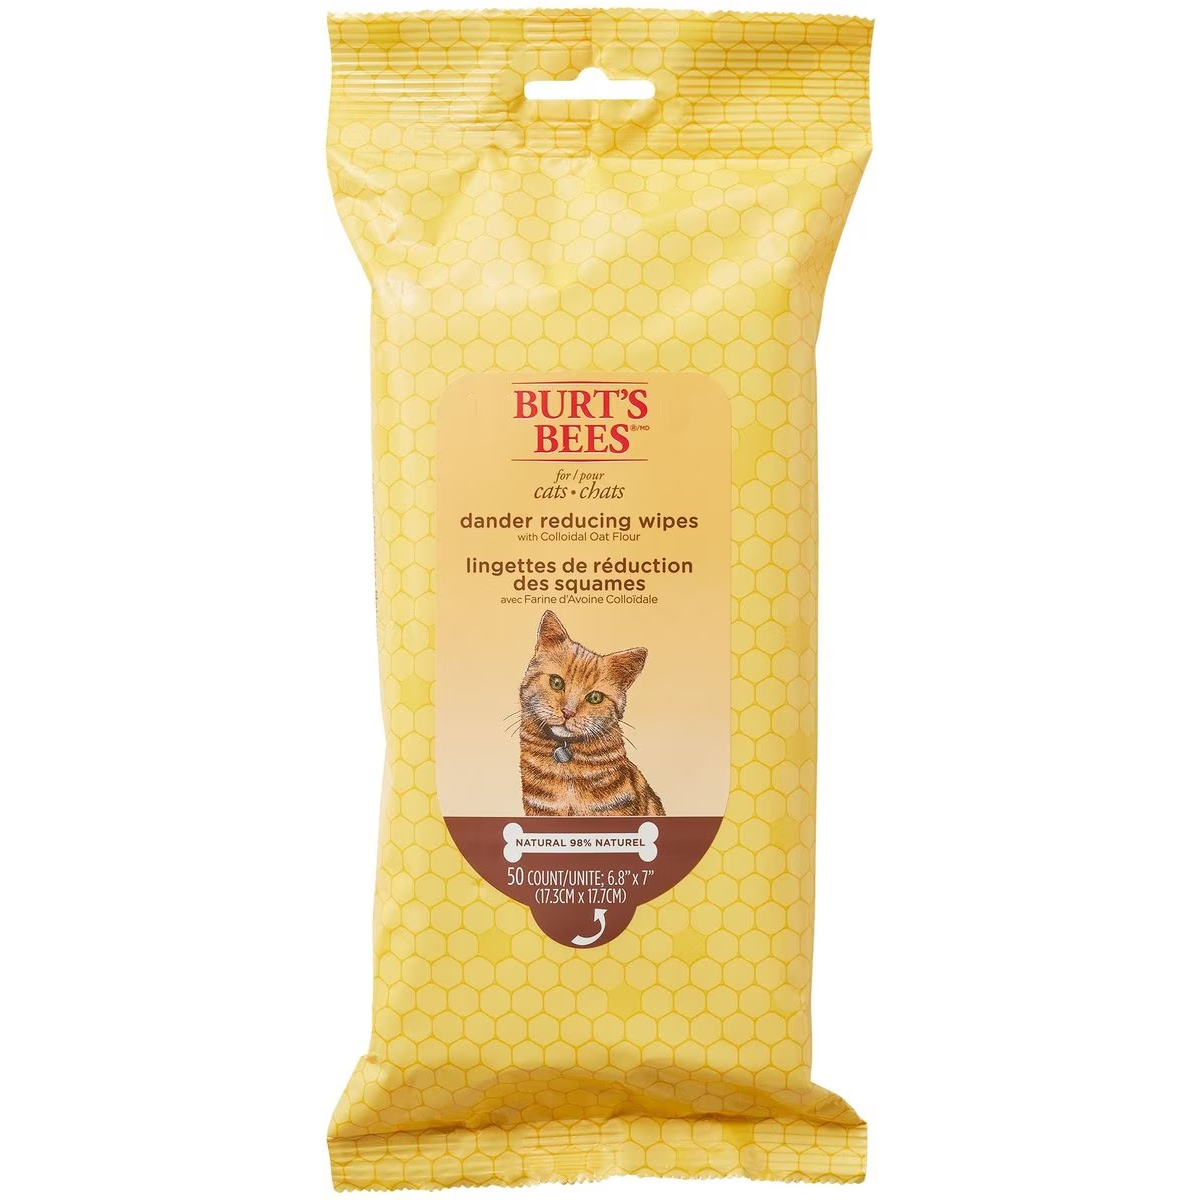 Burt's Bees Dander Reducing Wipes with Colloidal Oat Flour & Aloe Vera for Cats